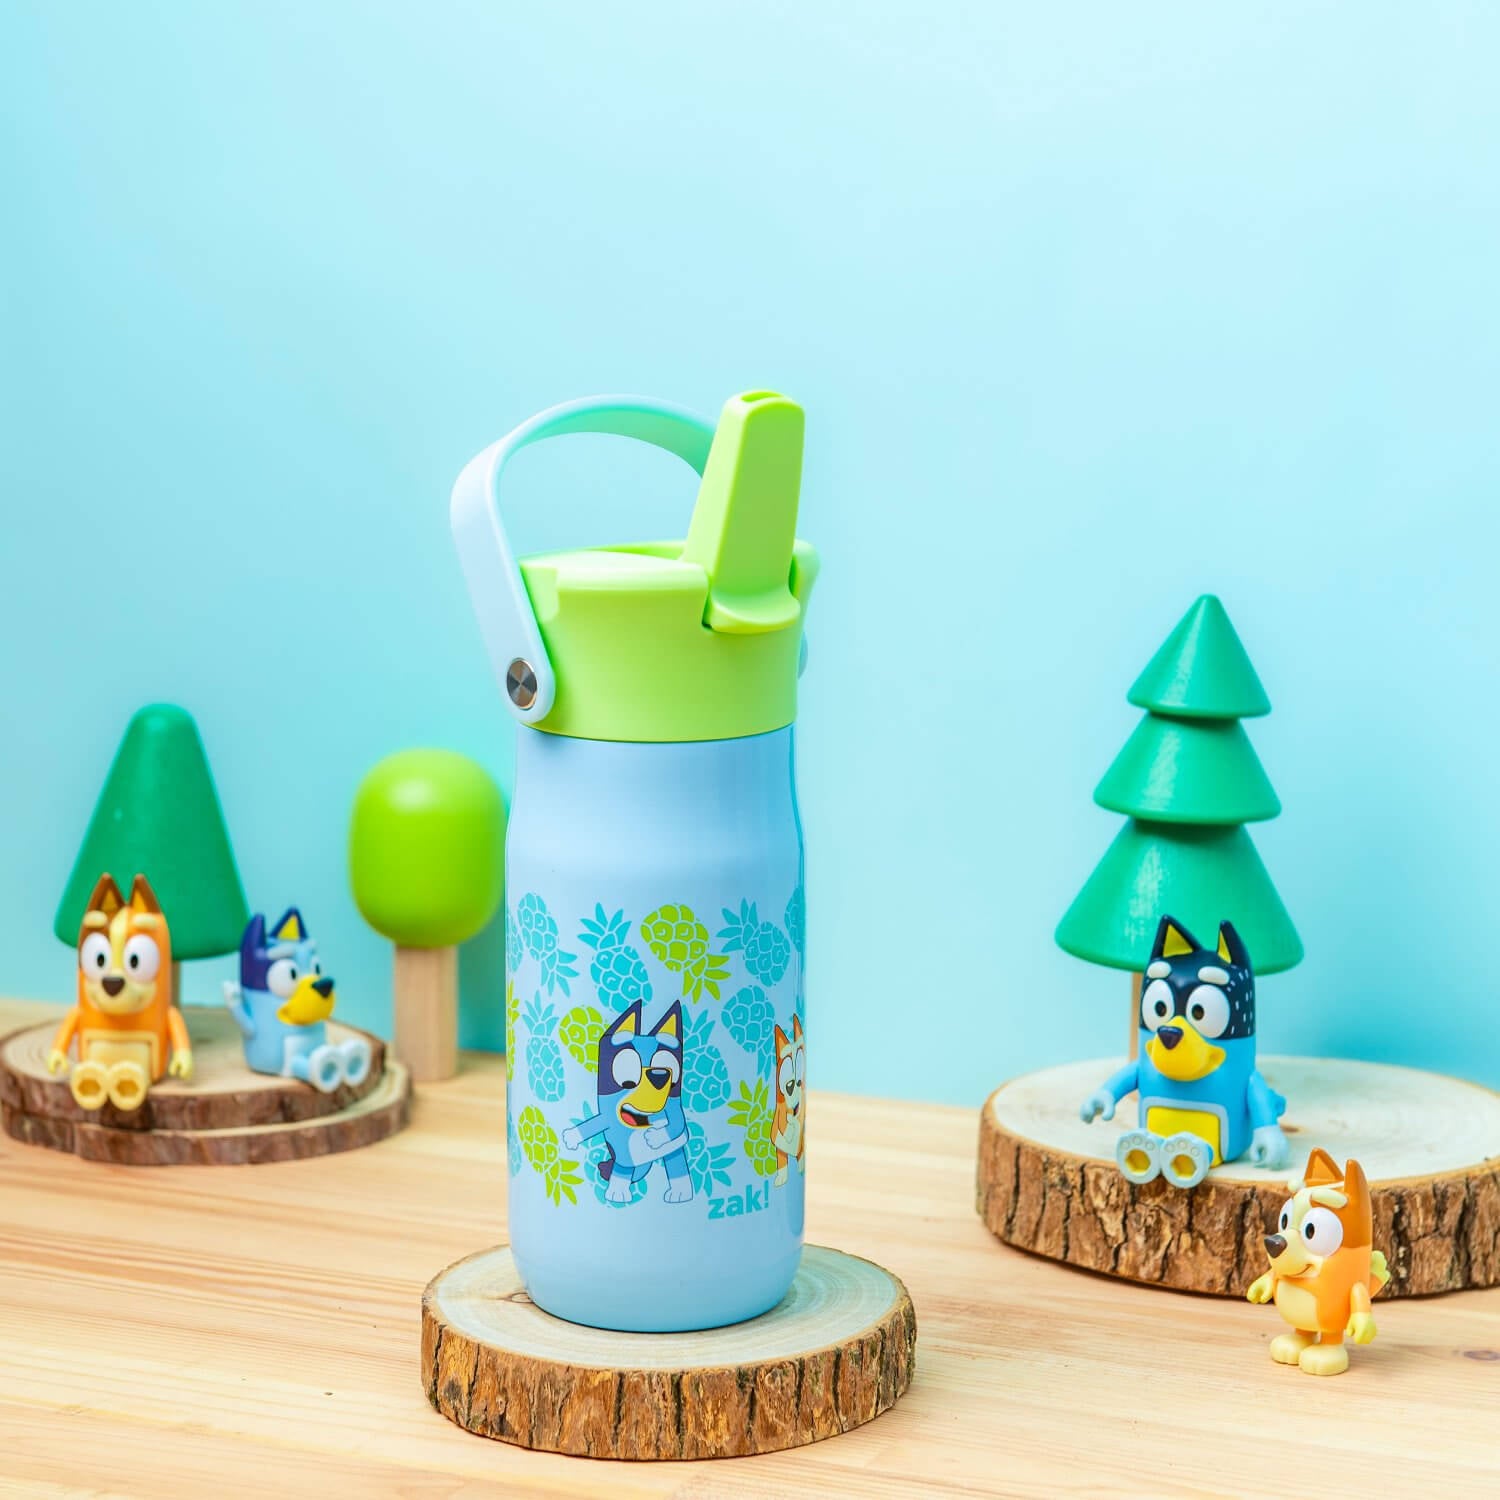 Zak Designs Harmony Bluey Kid Water Bottle for Travel or At Home, 14oz  Recycled Stainless Steel is L…See more Zak Designs Harmony Bluey Kid Water